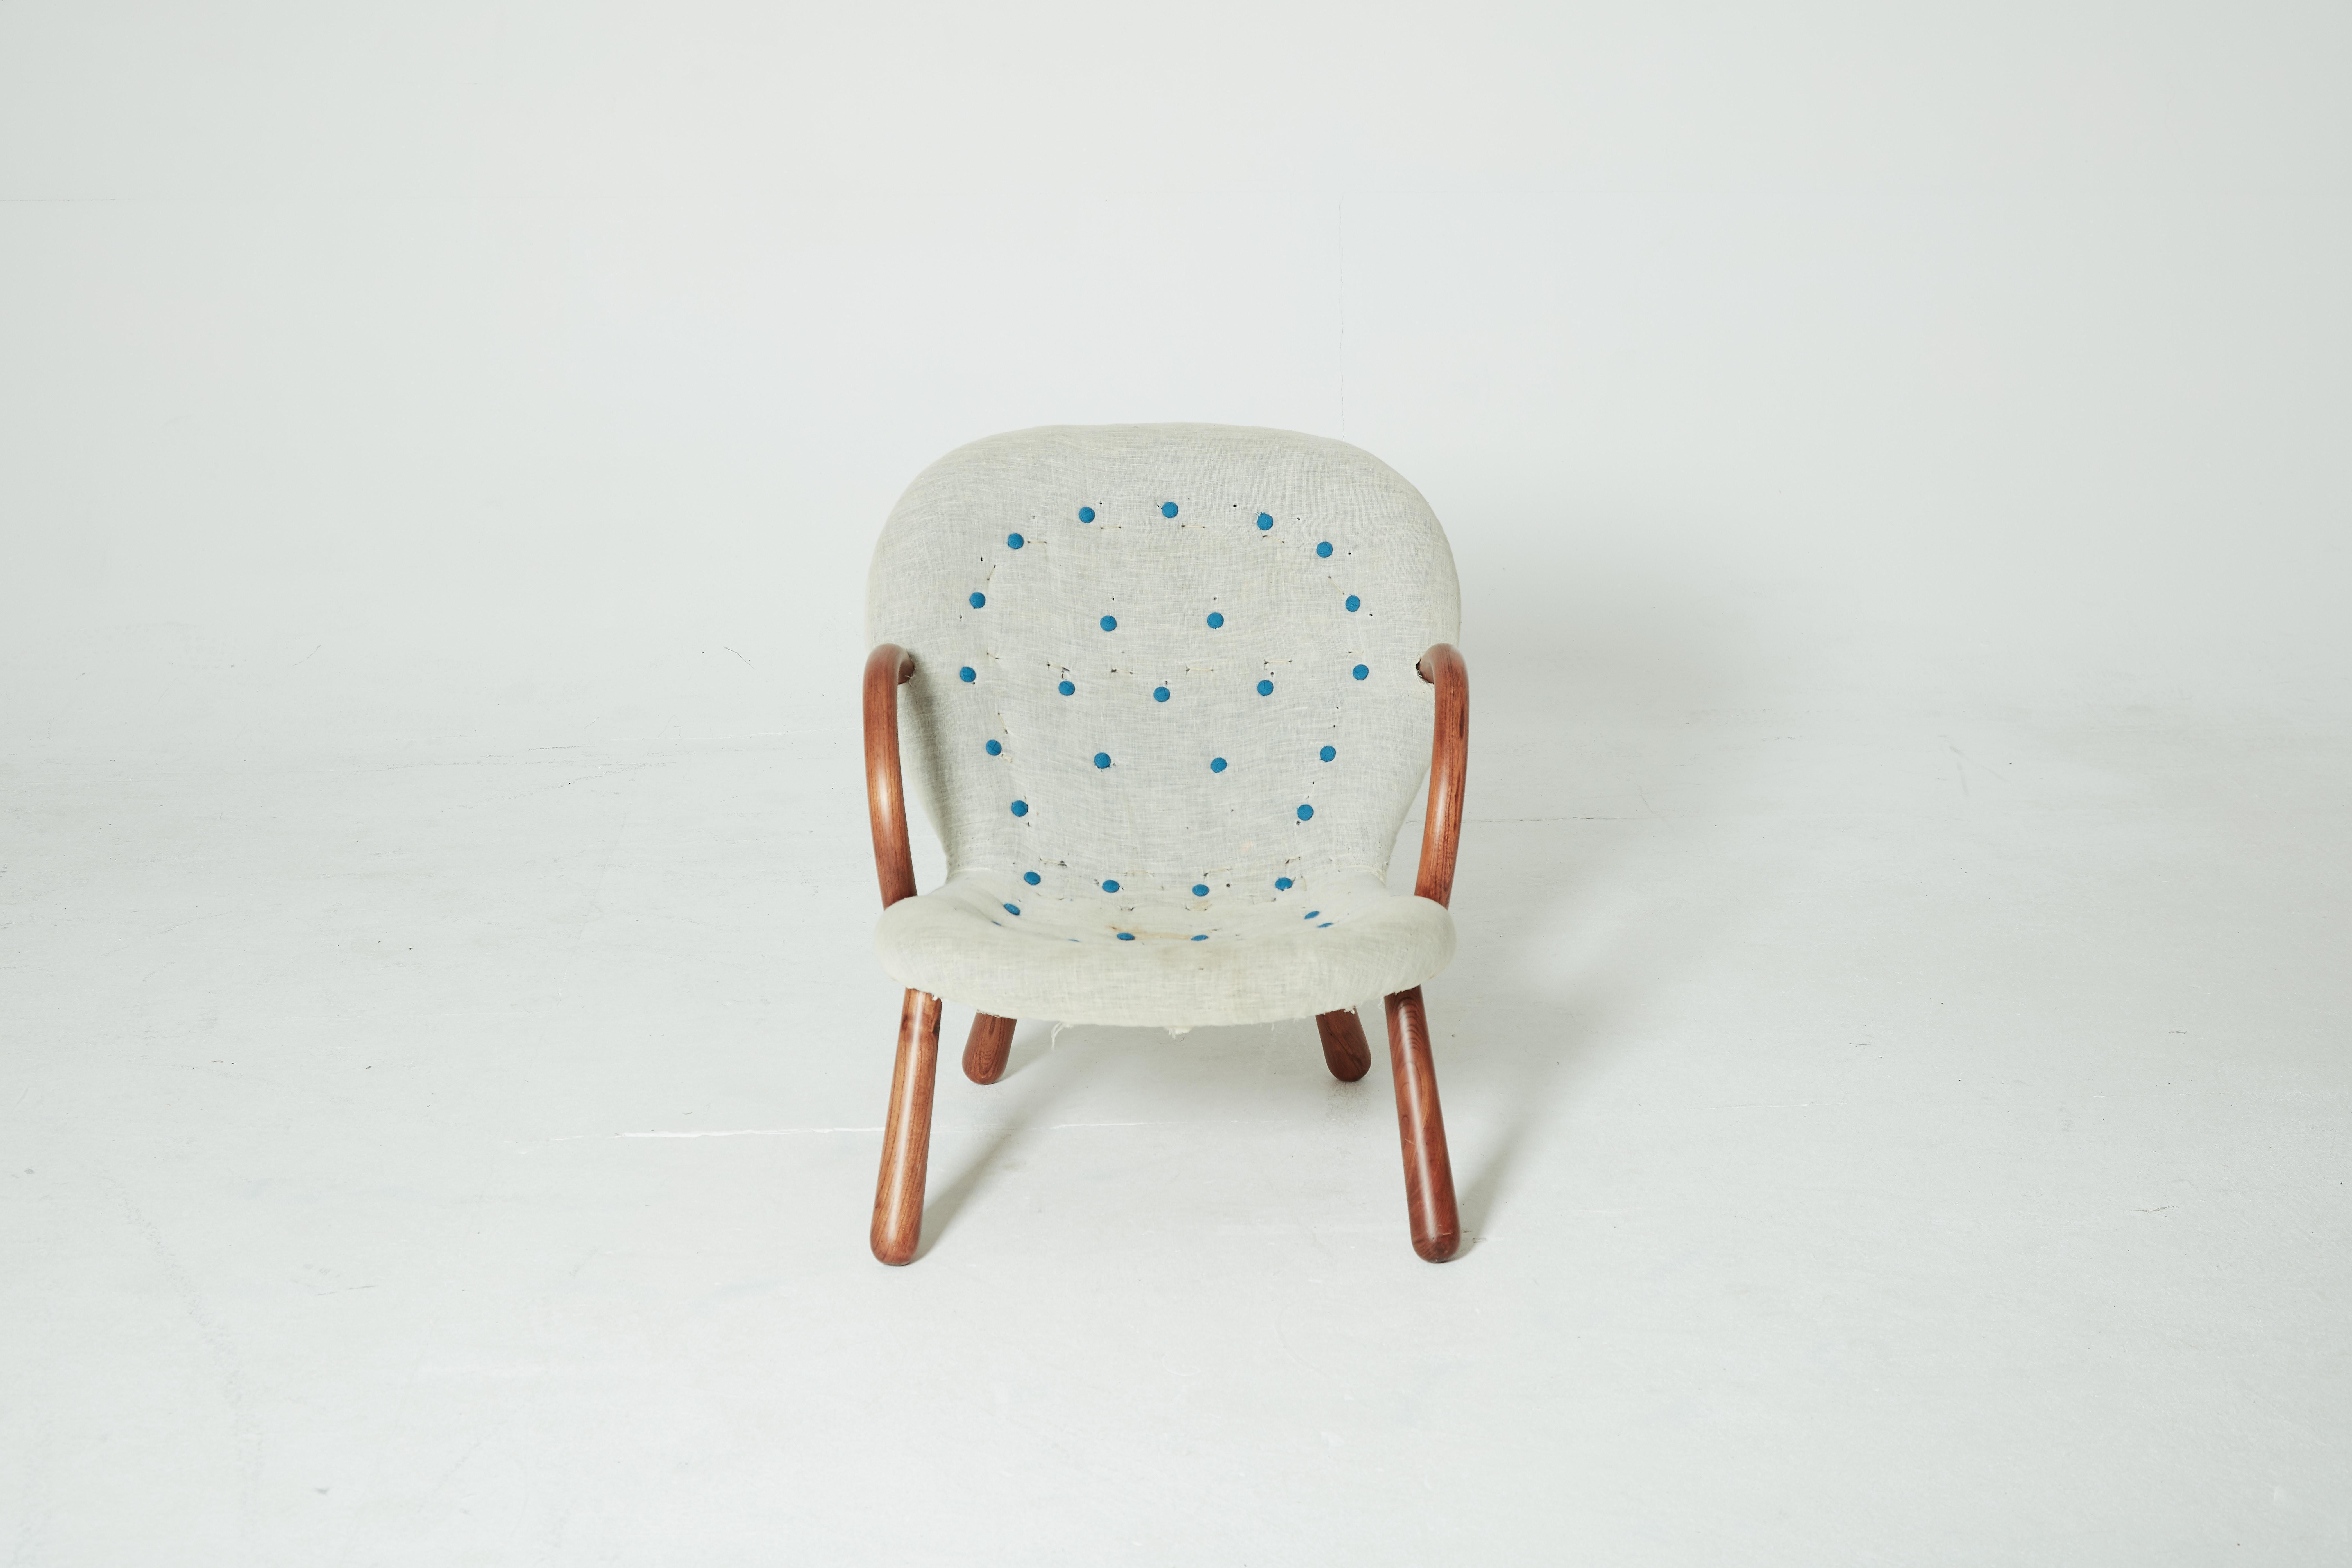 Scandinavian Modern 1940s Philip Arctander Clam Chair with Complimentary Re-Upholstery